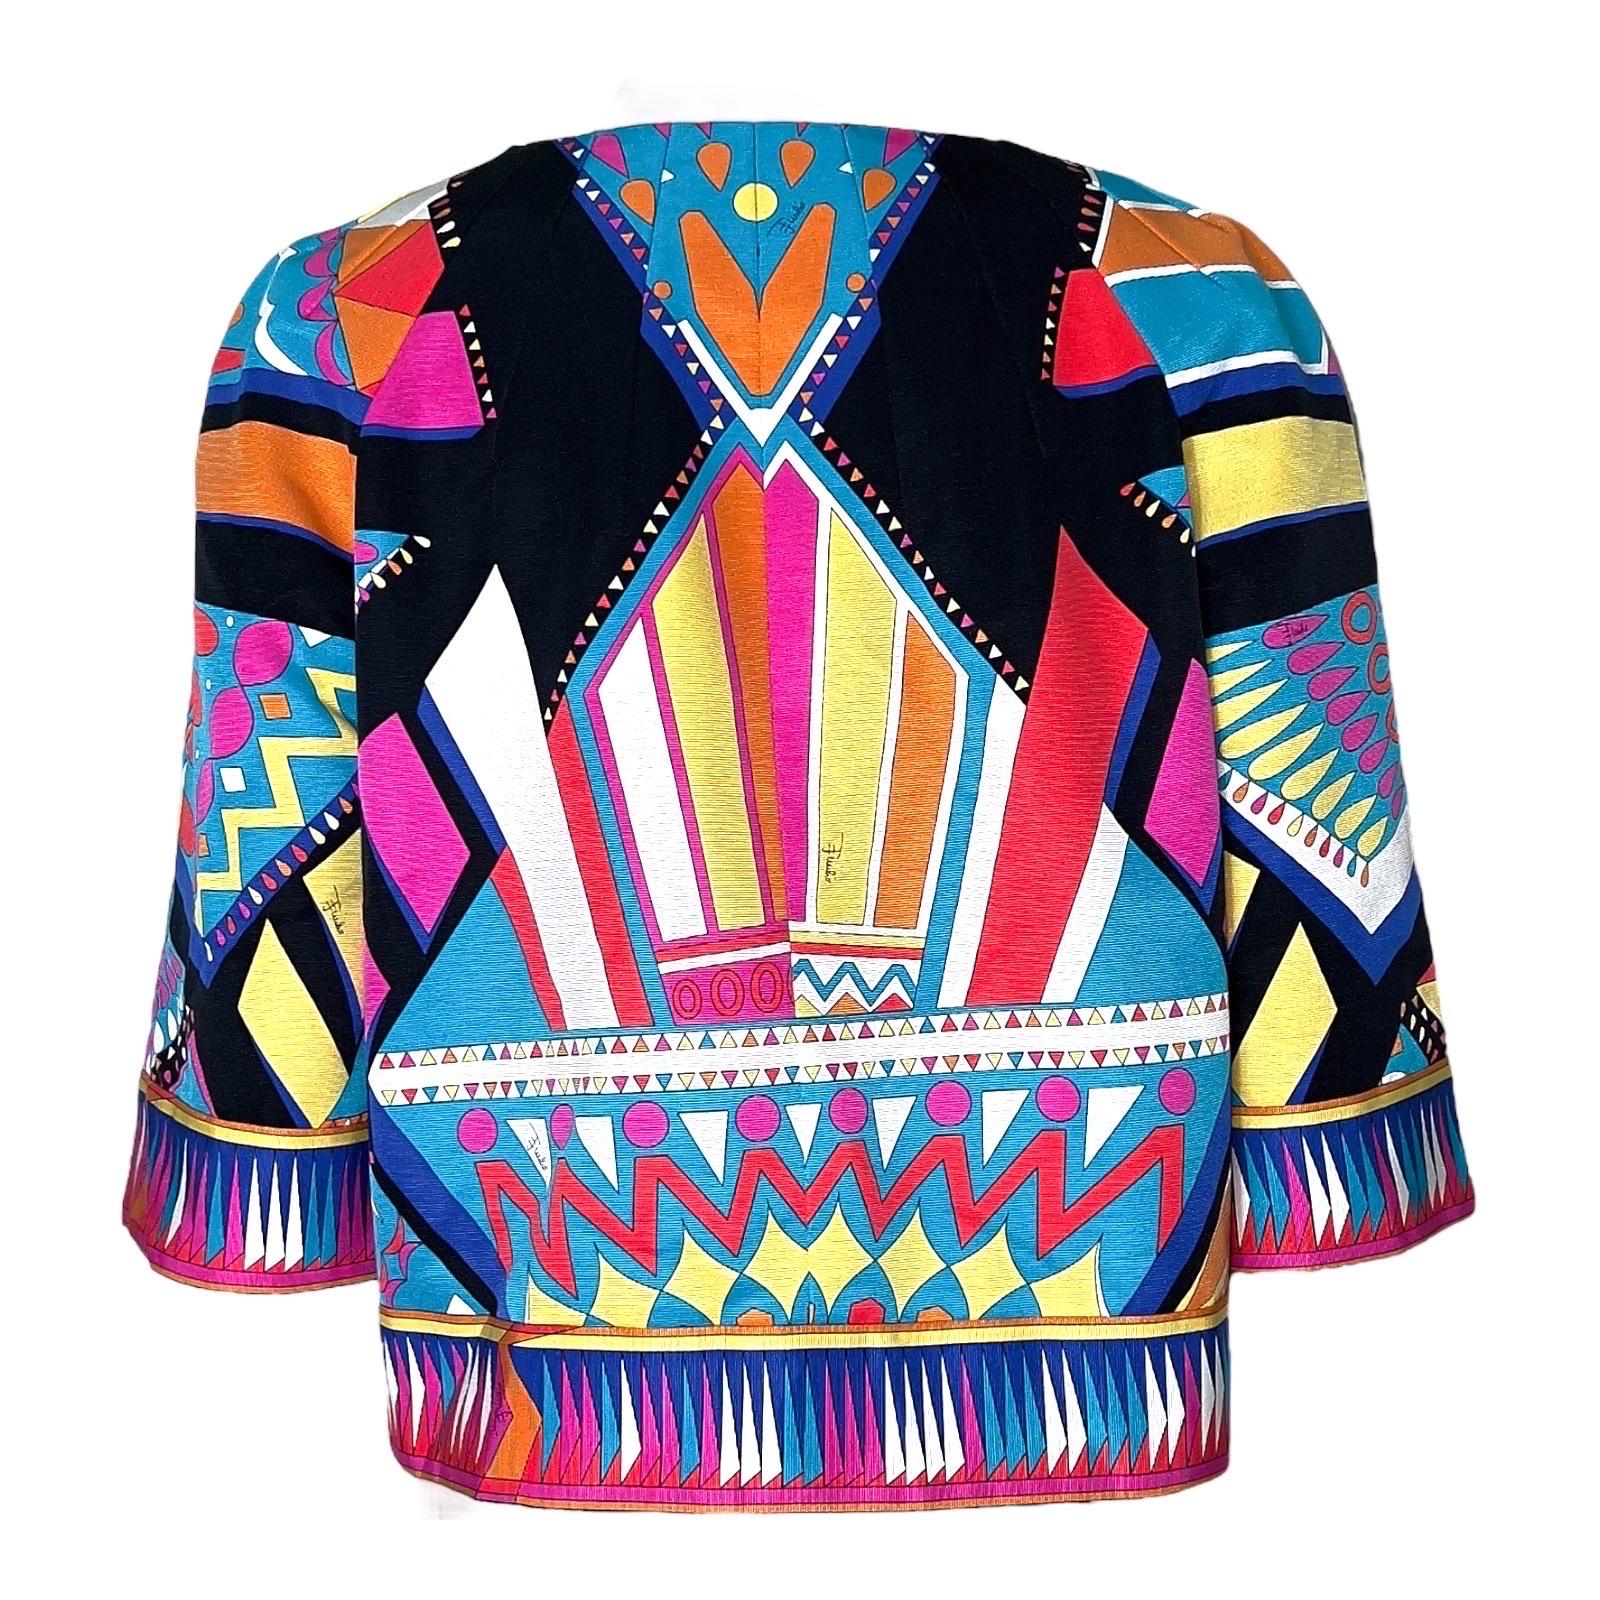 Rare cropped jacket by Emilio Pucci
Collectable piece - you hardly will find someone wearing the same jacket
As seen on Lily Collins in 